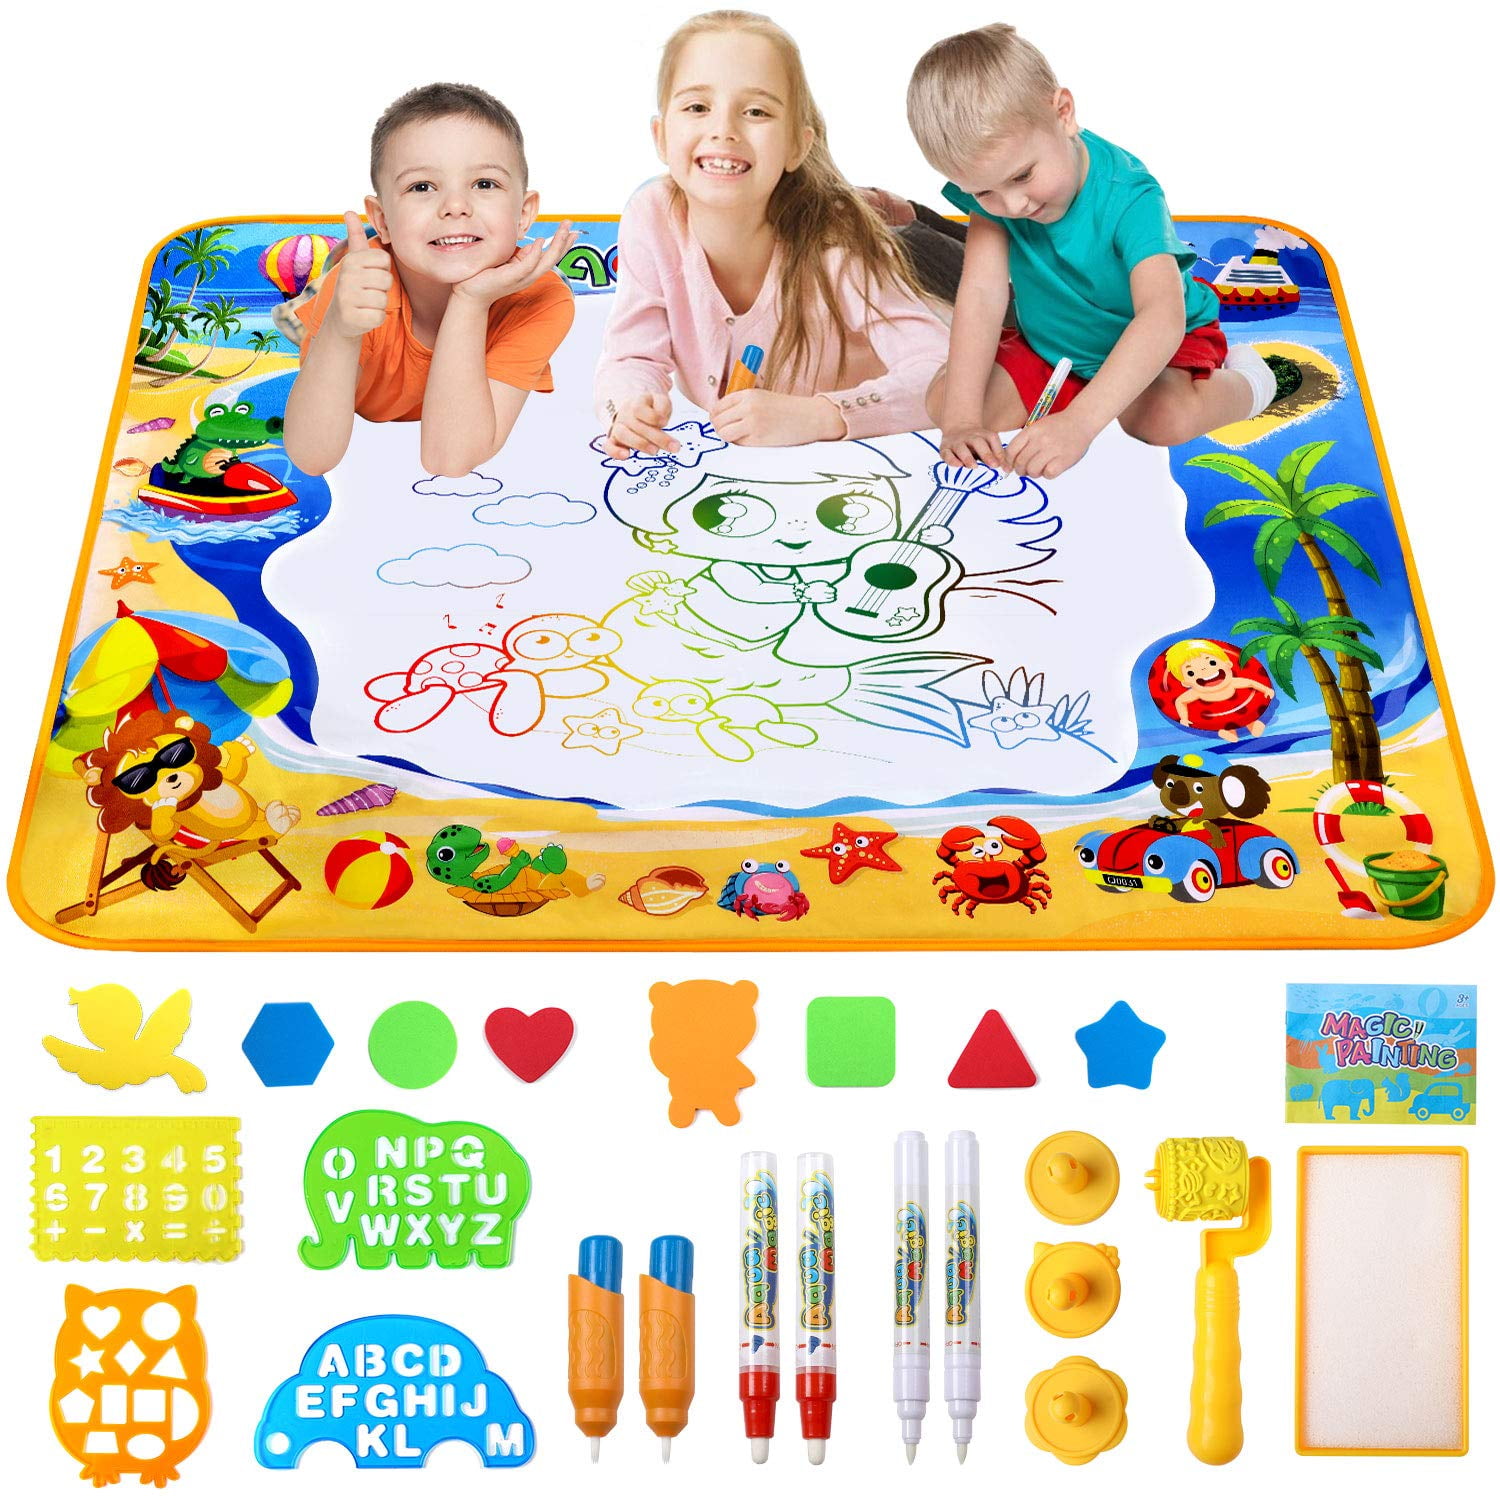 Details about   Kids Child Water Drawing Mat Painting Writing Aqua Doodle Board Toy w/ Magic Pen 